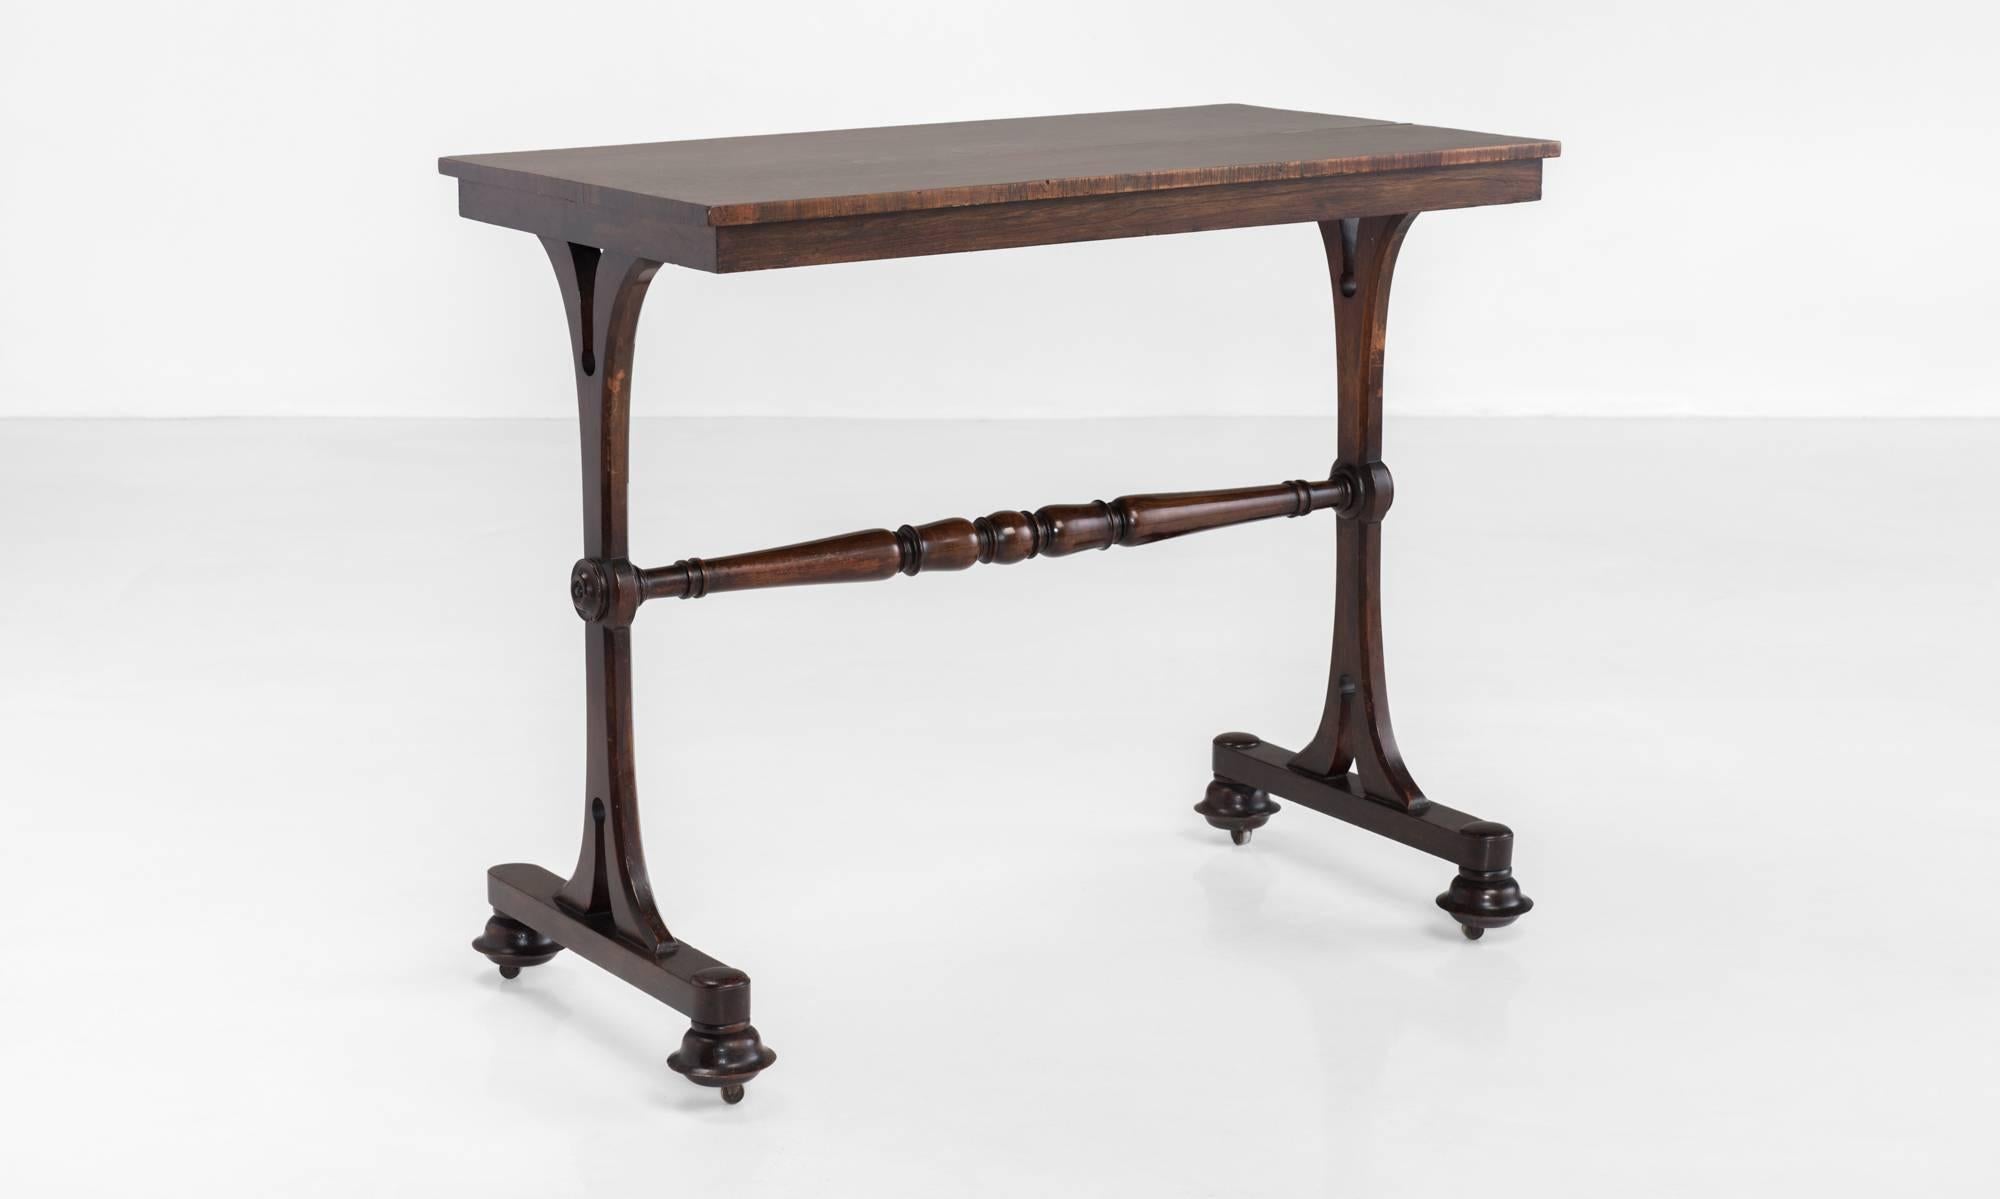 Rosewood Side Table, circa 1825

Two-plank top over a beautifully turned central stretcher connecting elegant legs on casters.